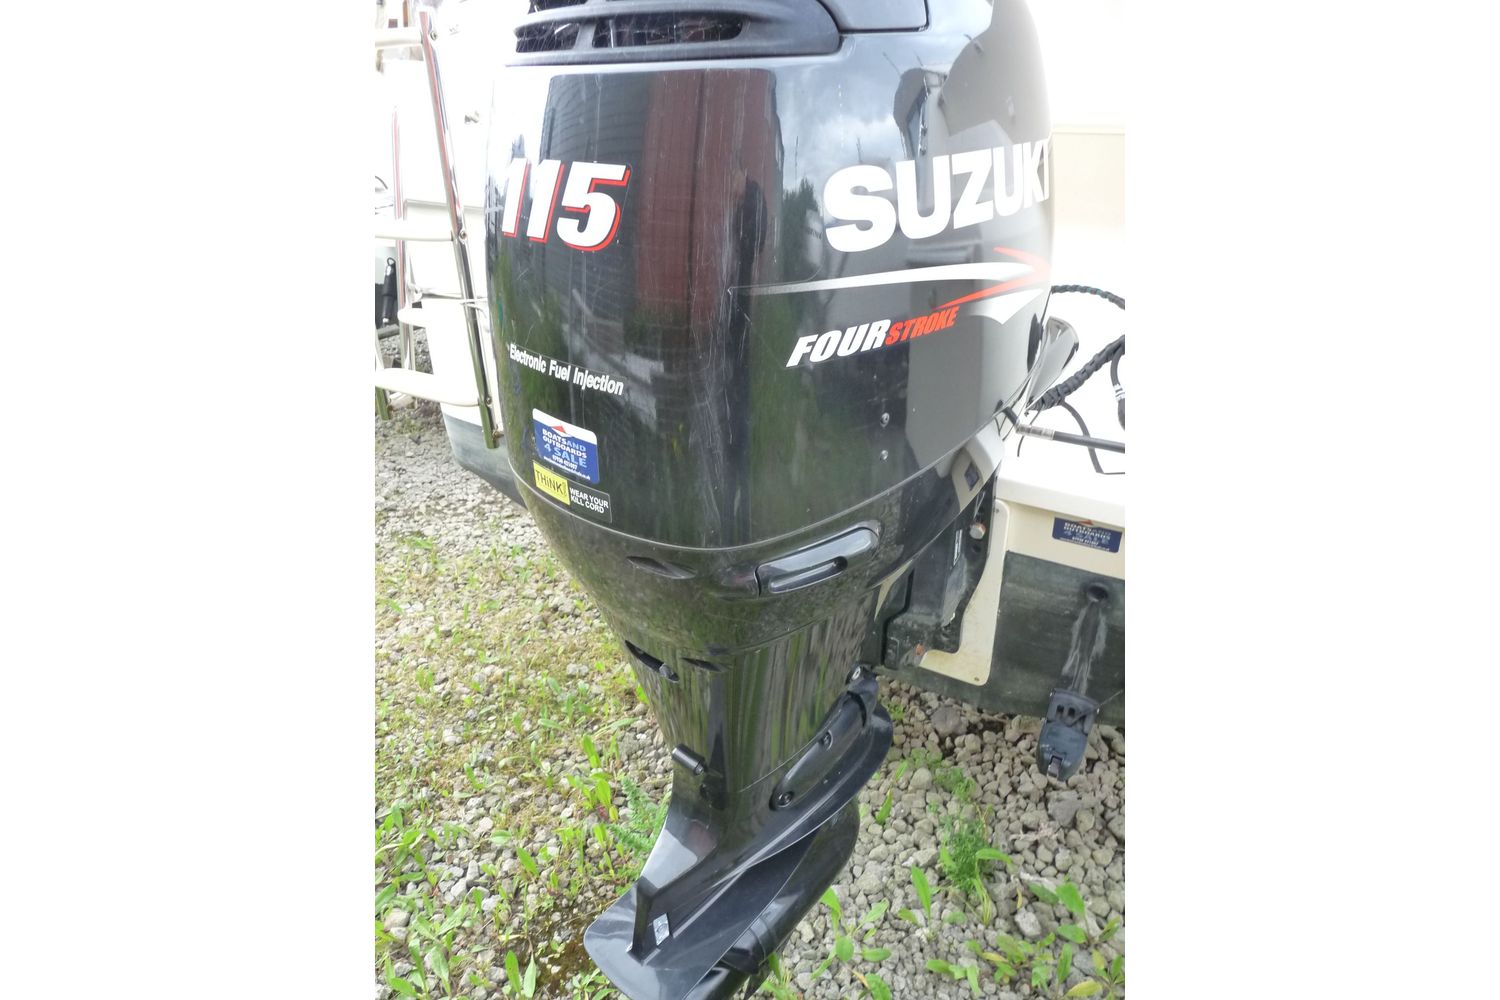 Jeanneau Merry Fisher 645 - with Suzuki 115hp outboard